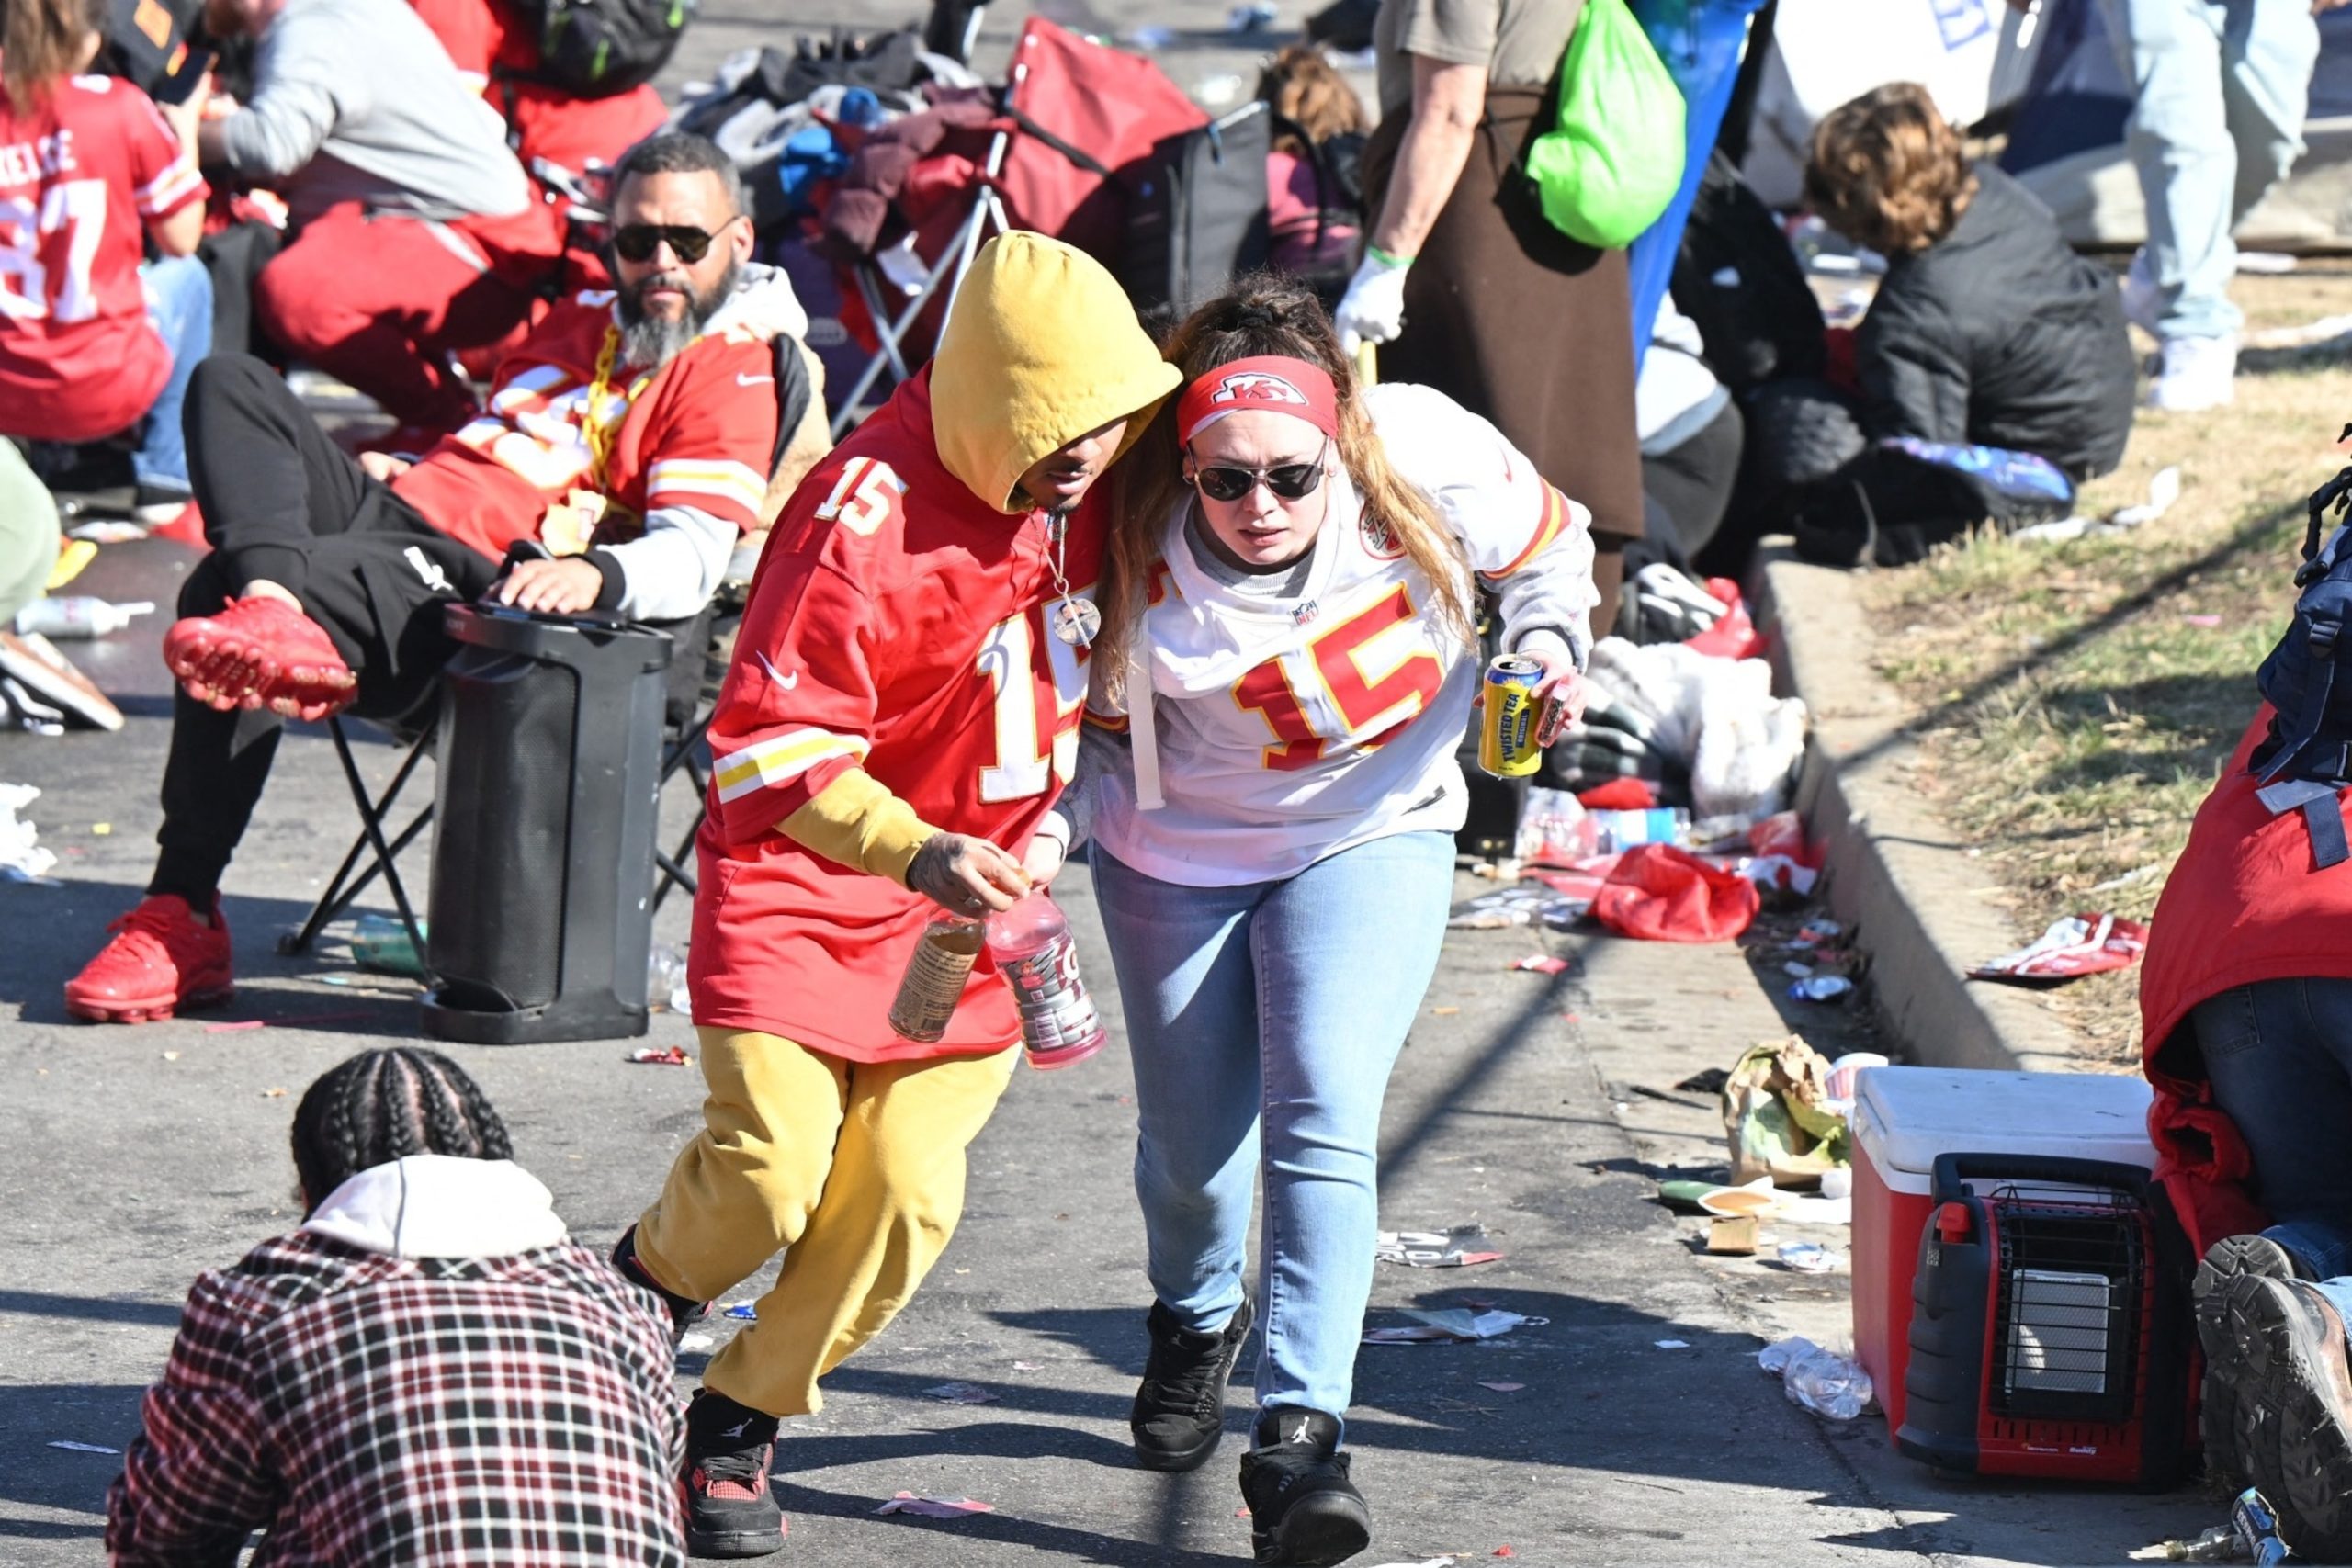 Paradegoers share their experiences of panic during shooting following Chiefs Super Bowl rally: Witness accounts of chaos and fleeing